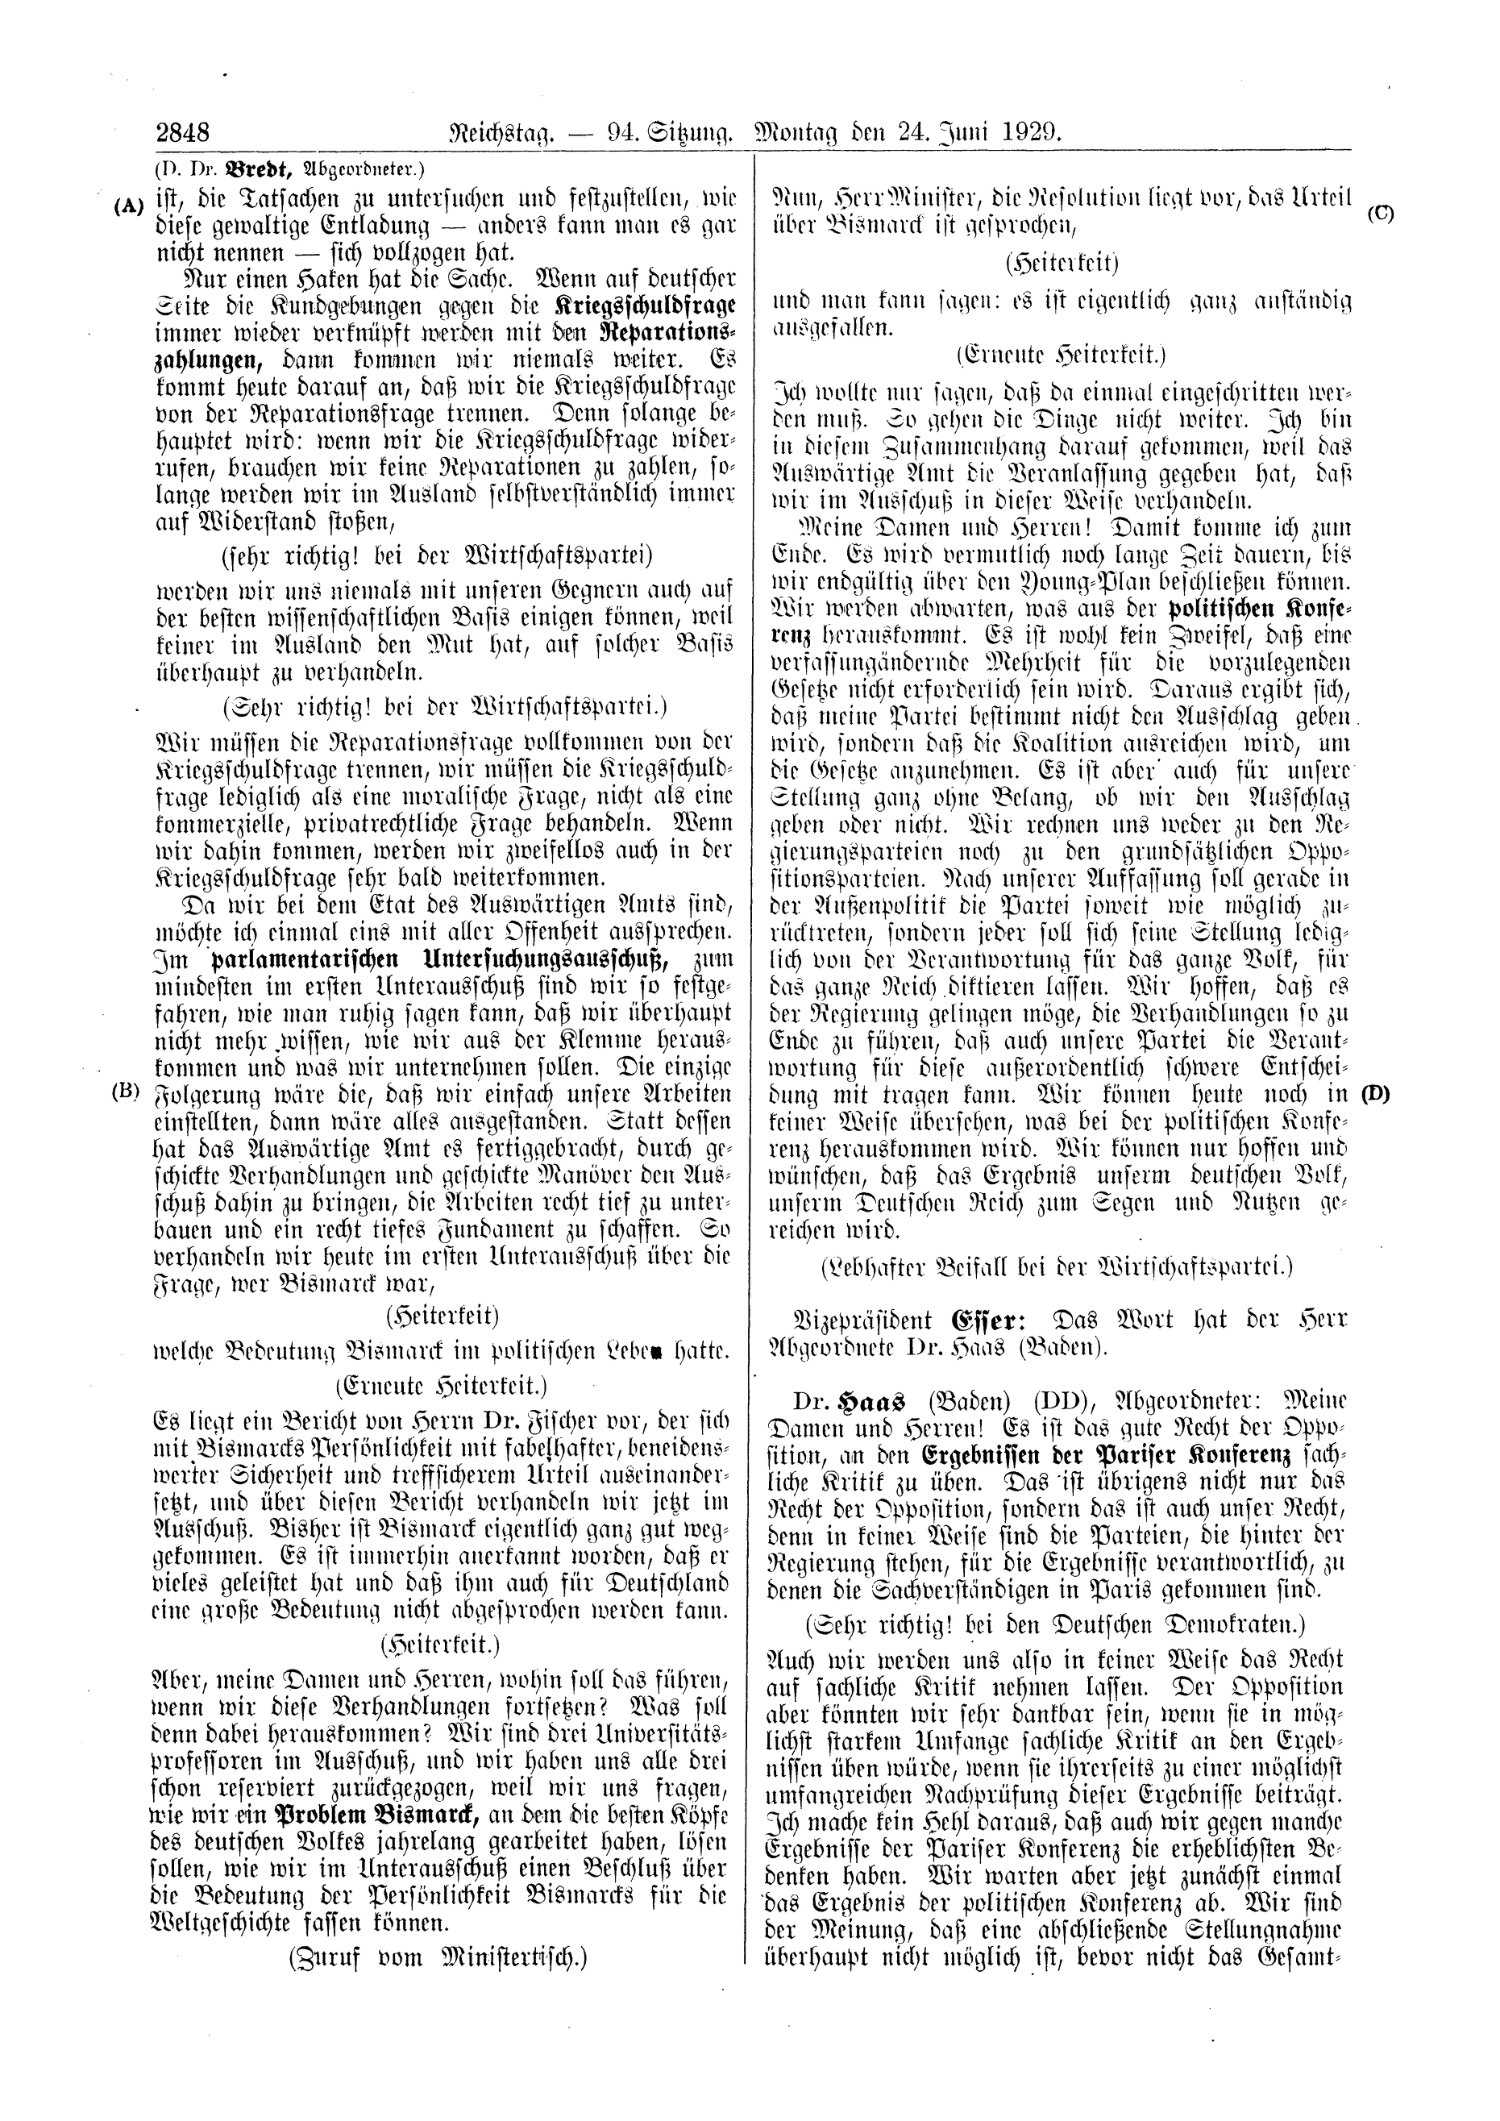 Scan of page 2848